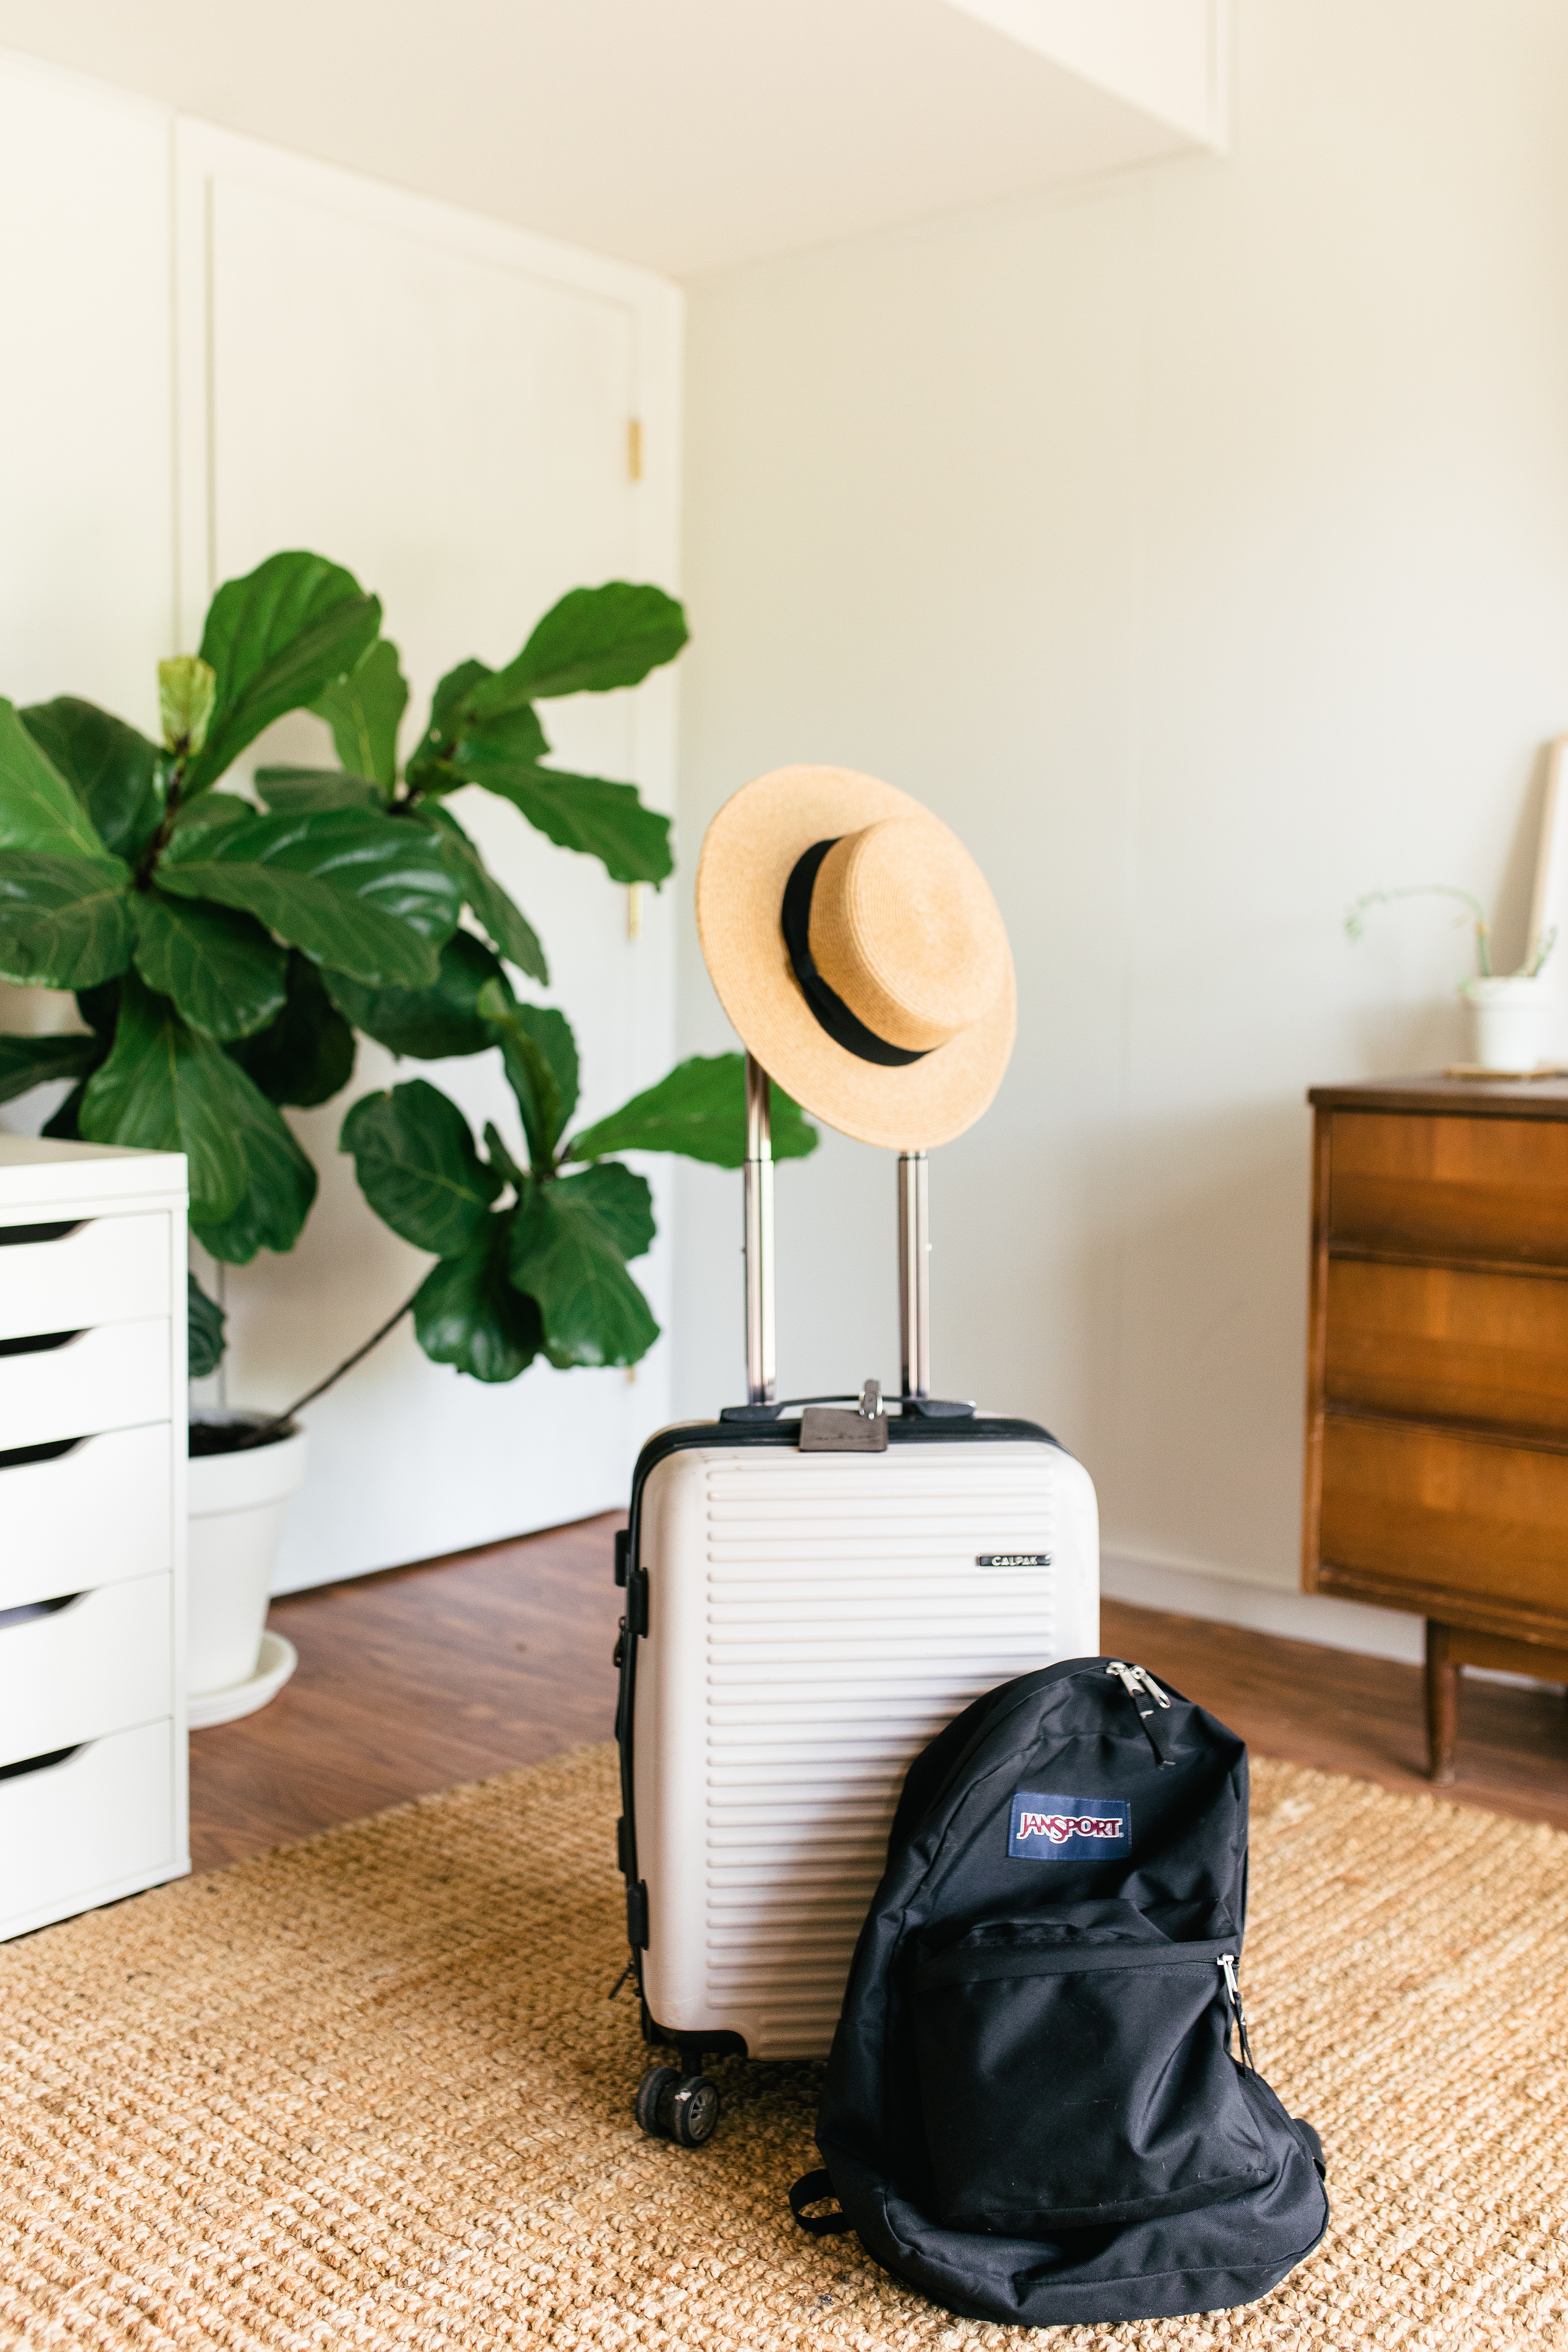 suitcase and backpack in room with plant in the background